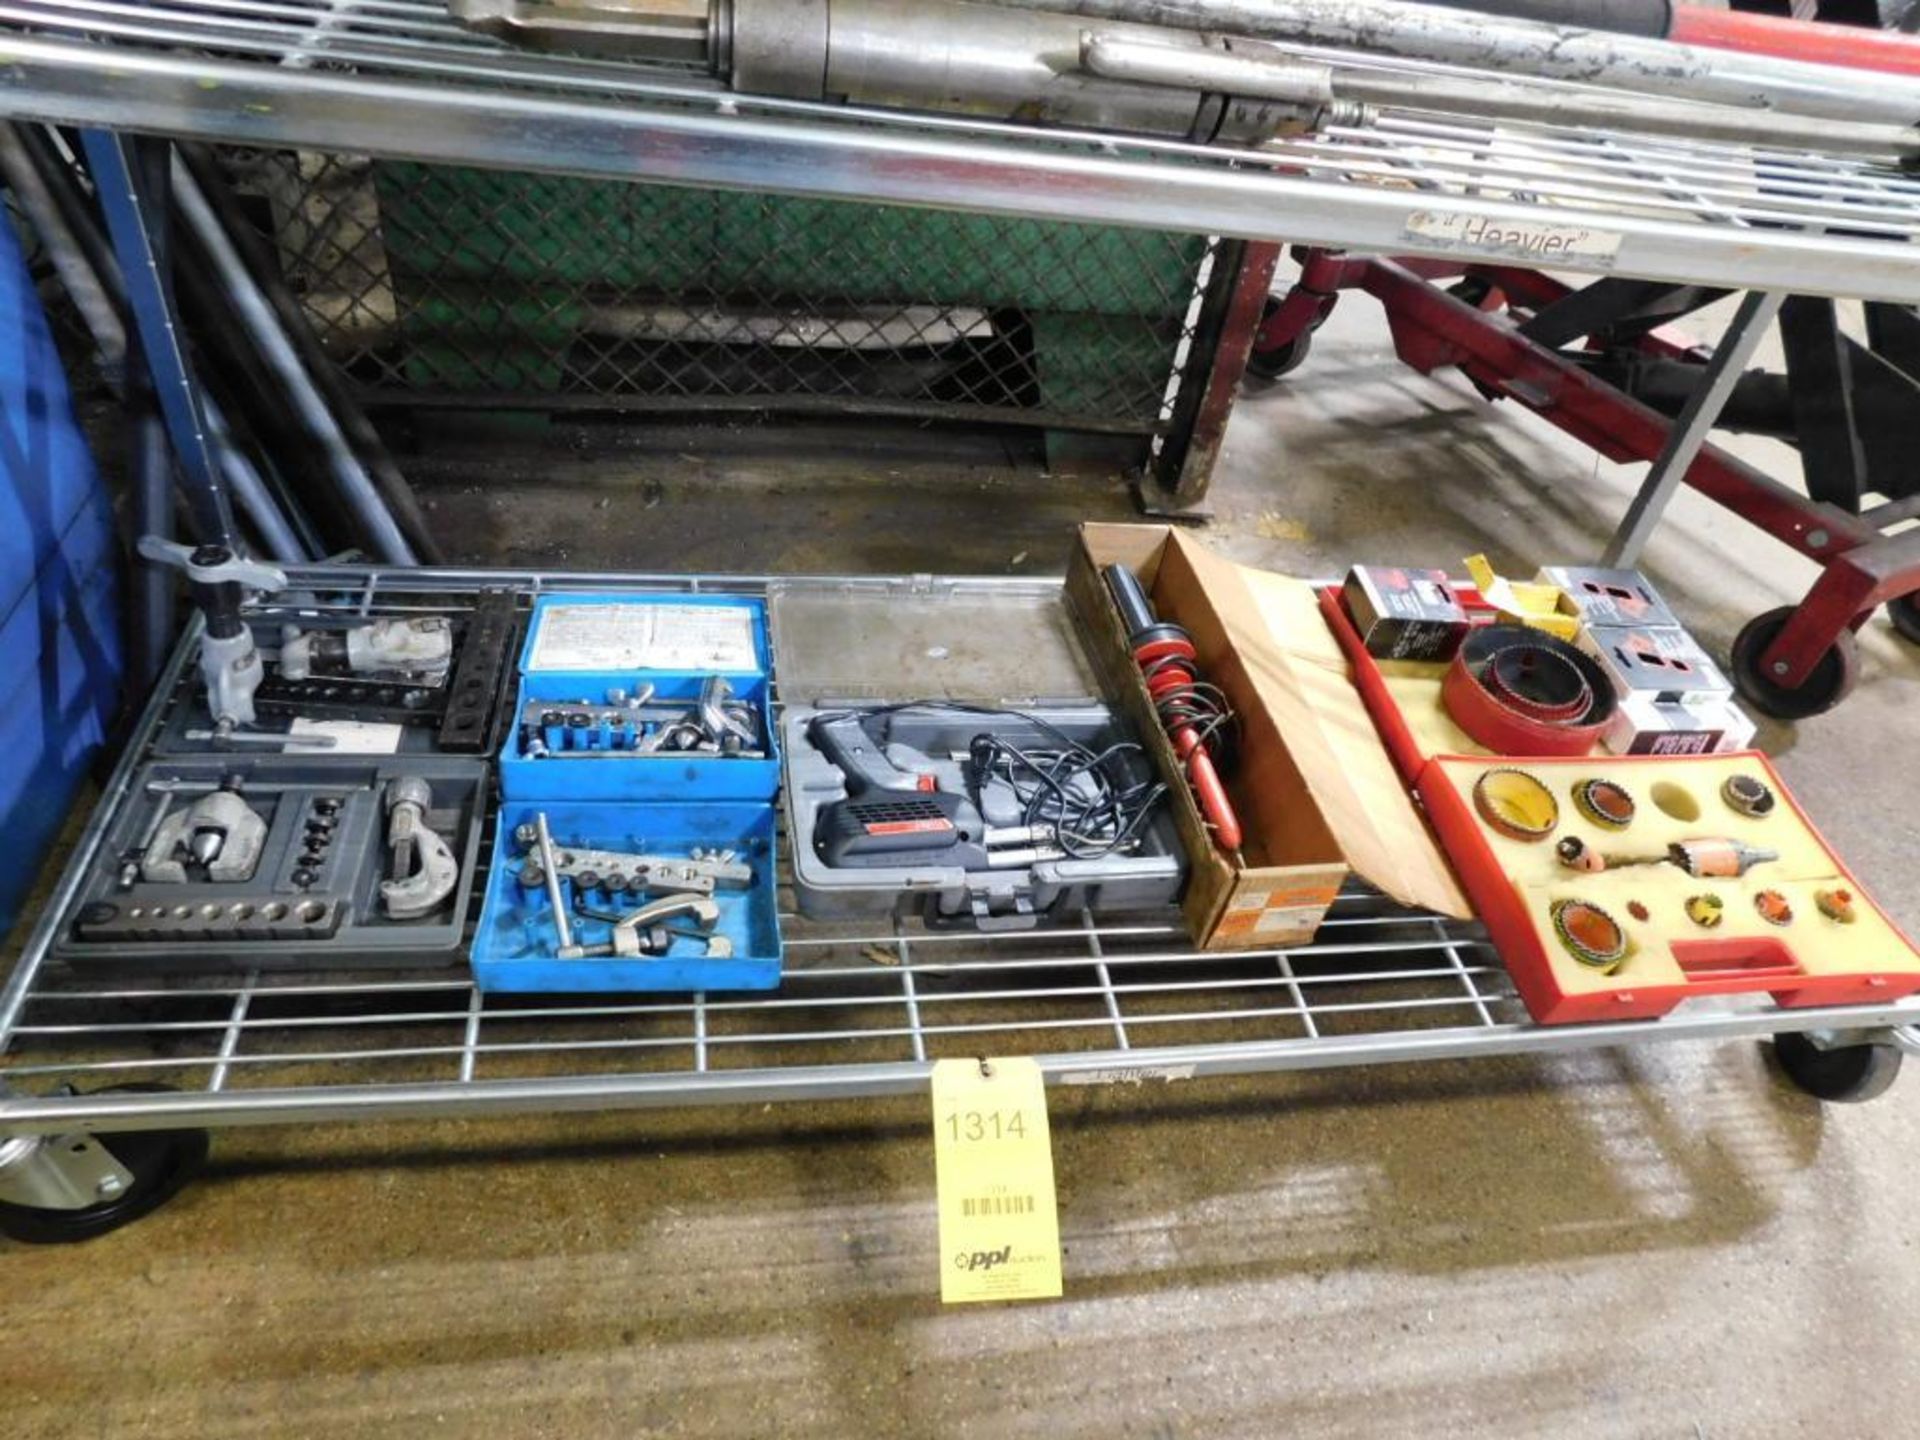 LOT: Assorted Ridgid Pullers, Pullers, Soldering Guns, Starrett Hole Saws, Hole Saws